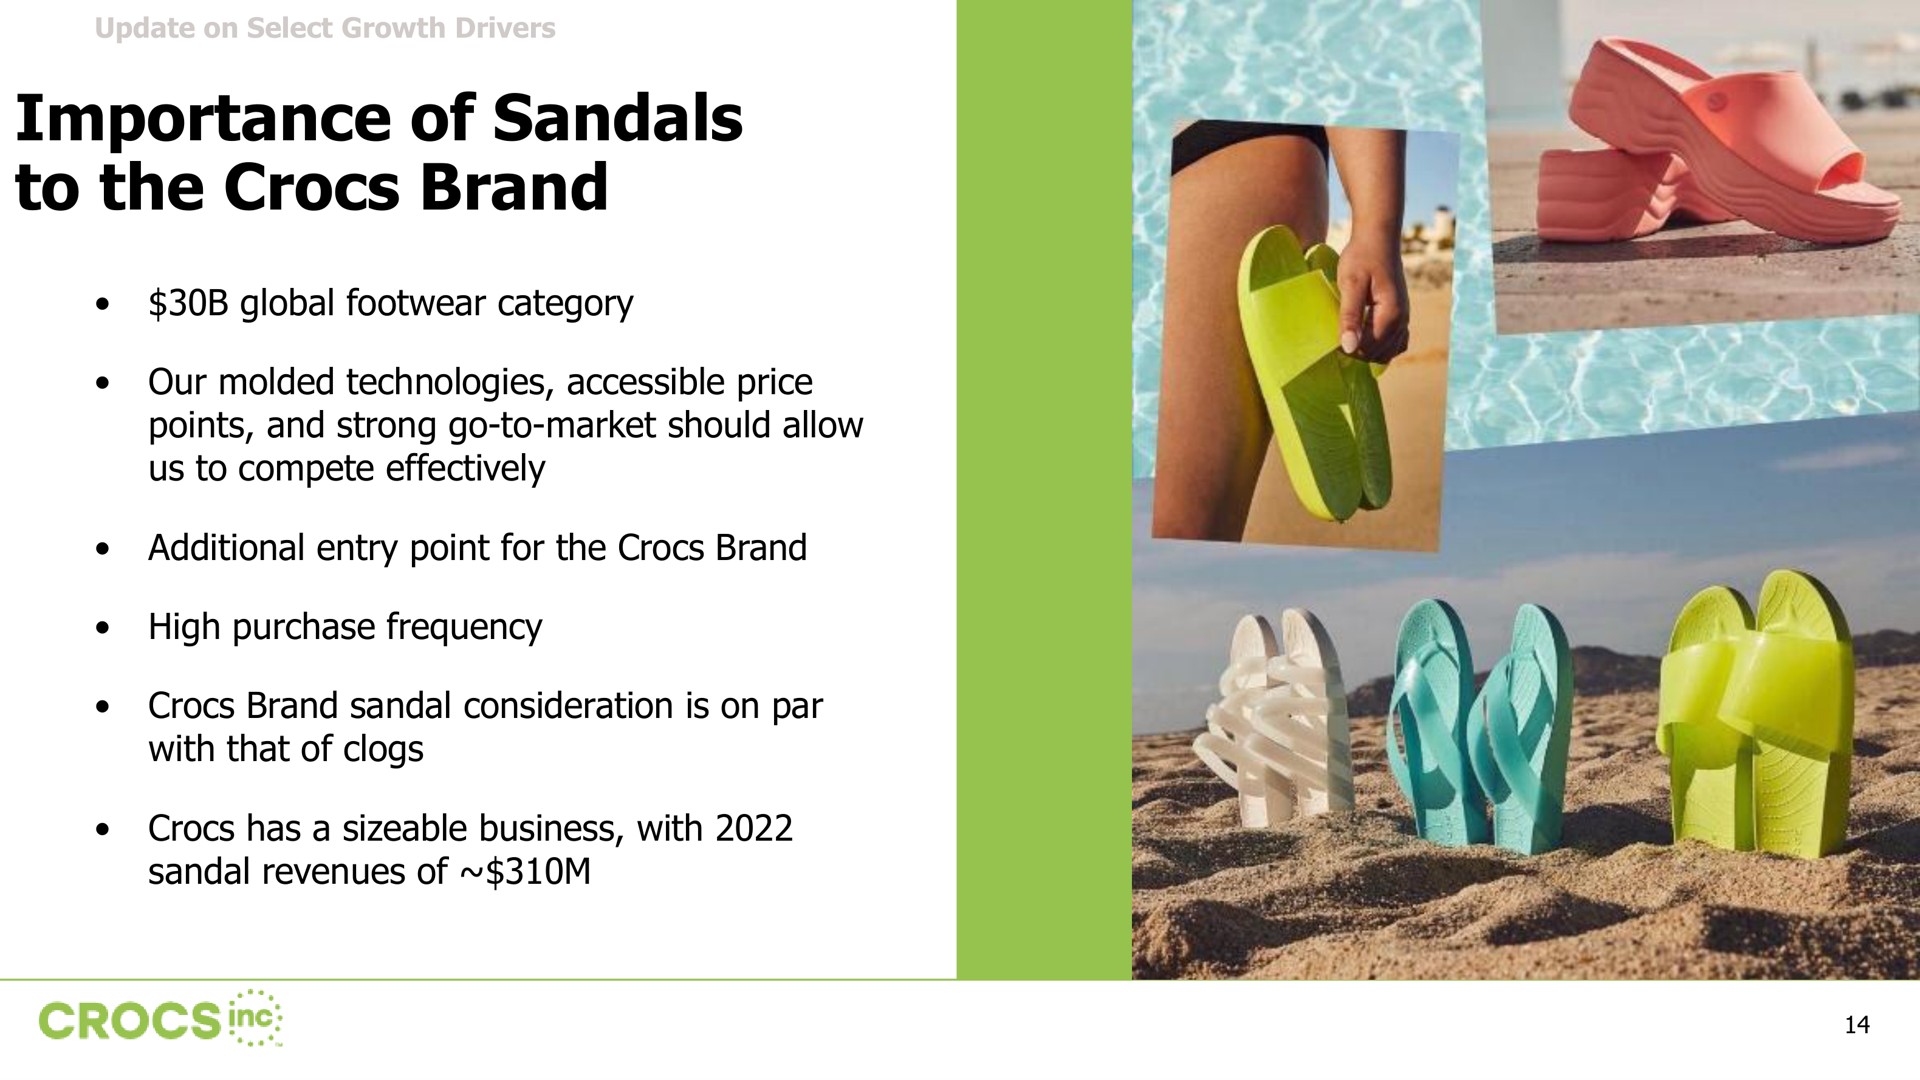 importance of sandals to the brand | Crocs